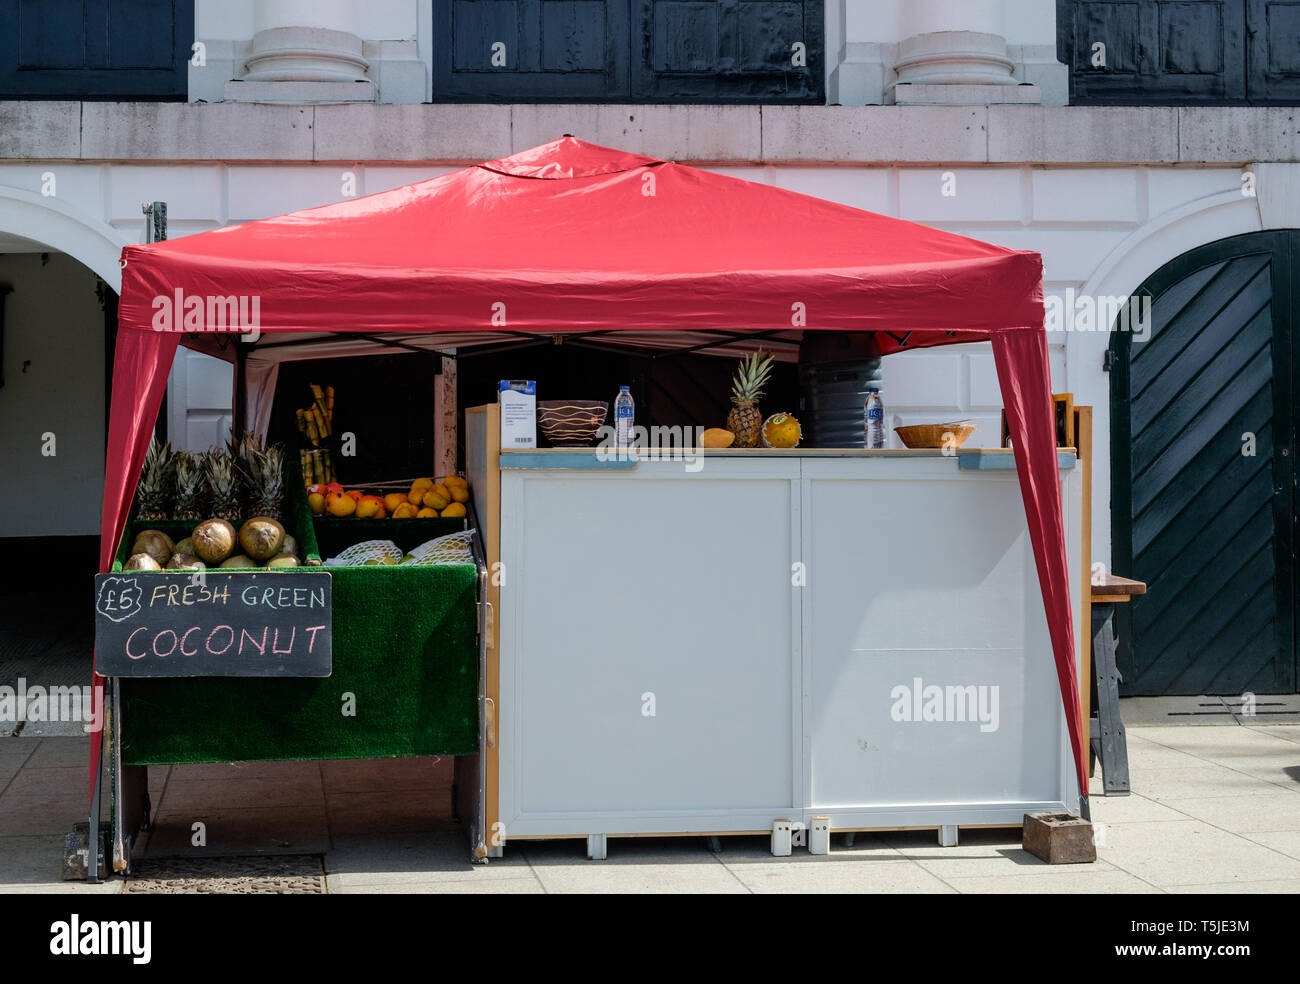 Kiosk with red tented roof next to Revolution London on Buccleuch Passage,selling fresh coconut and other foods. Richmond, London. May, 2018 Stock Photo